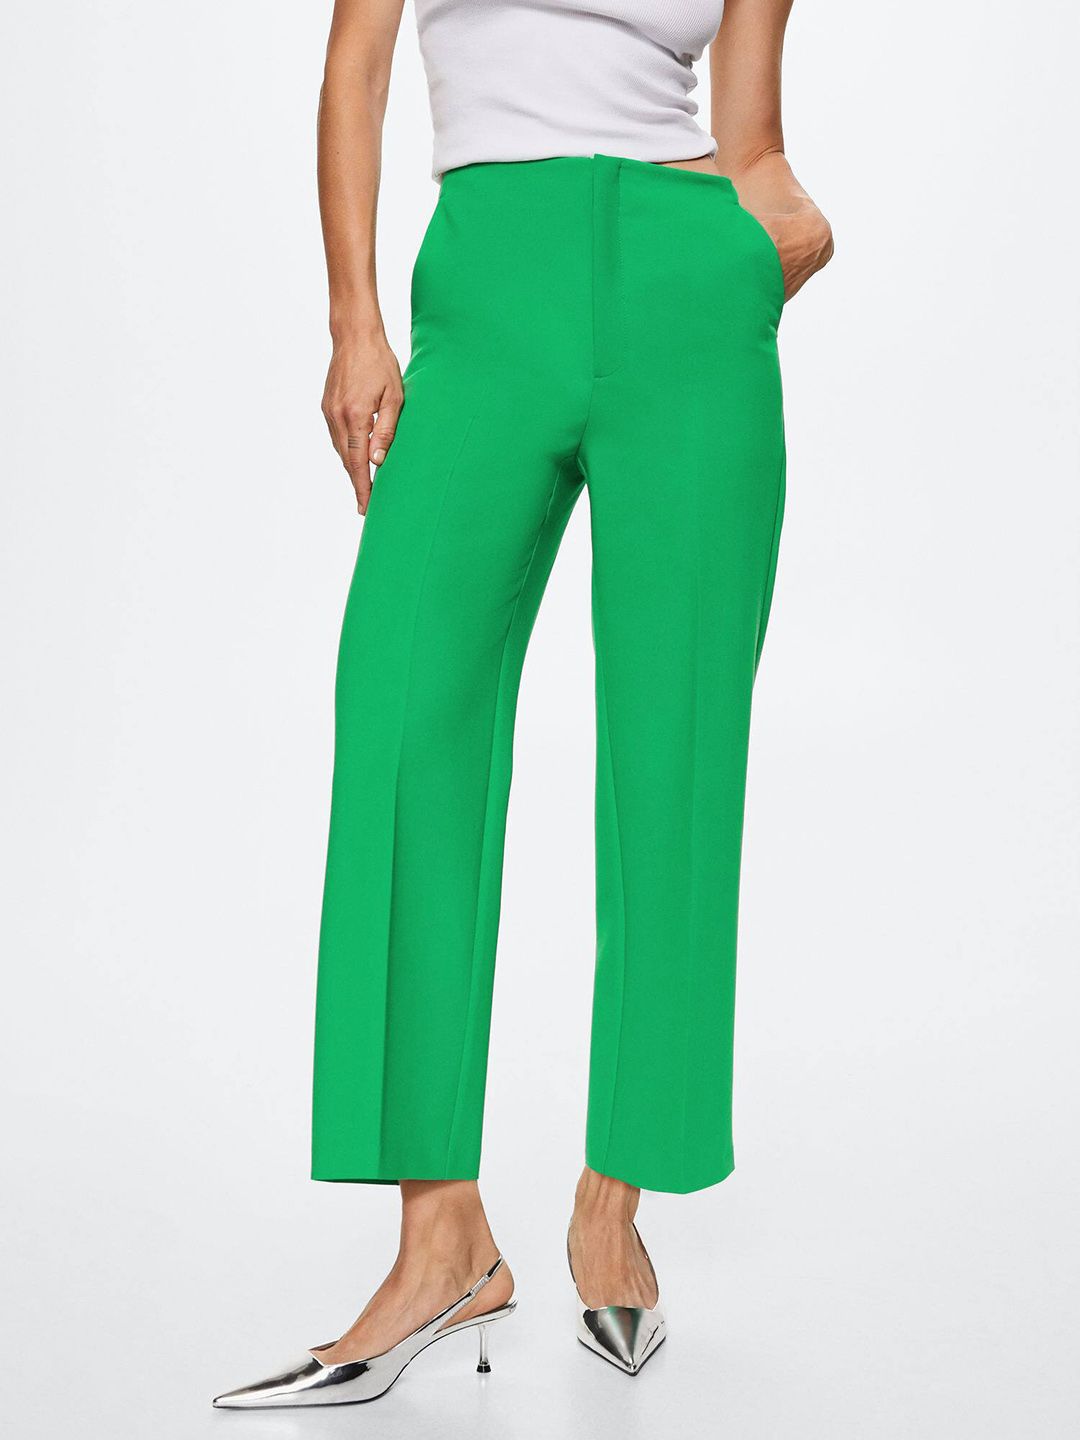 MANGO Women Green Pleated Sustainable Trousers Price in India